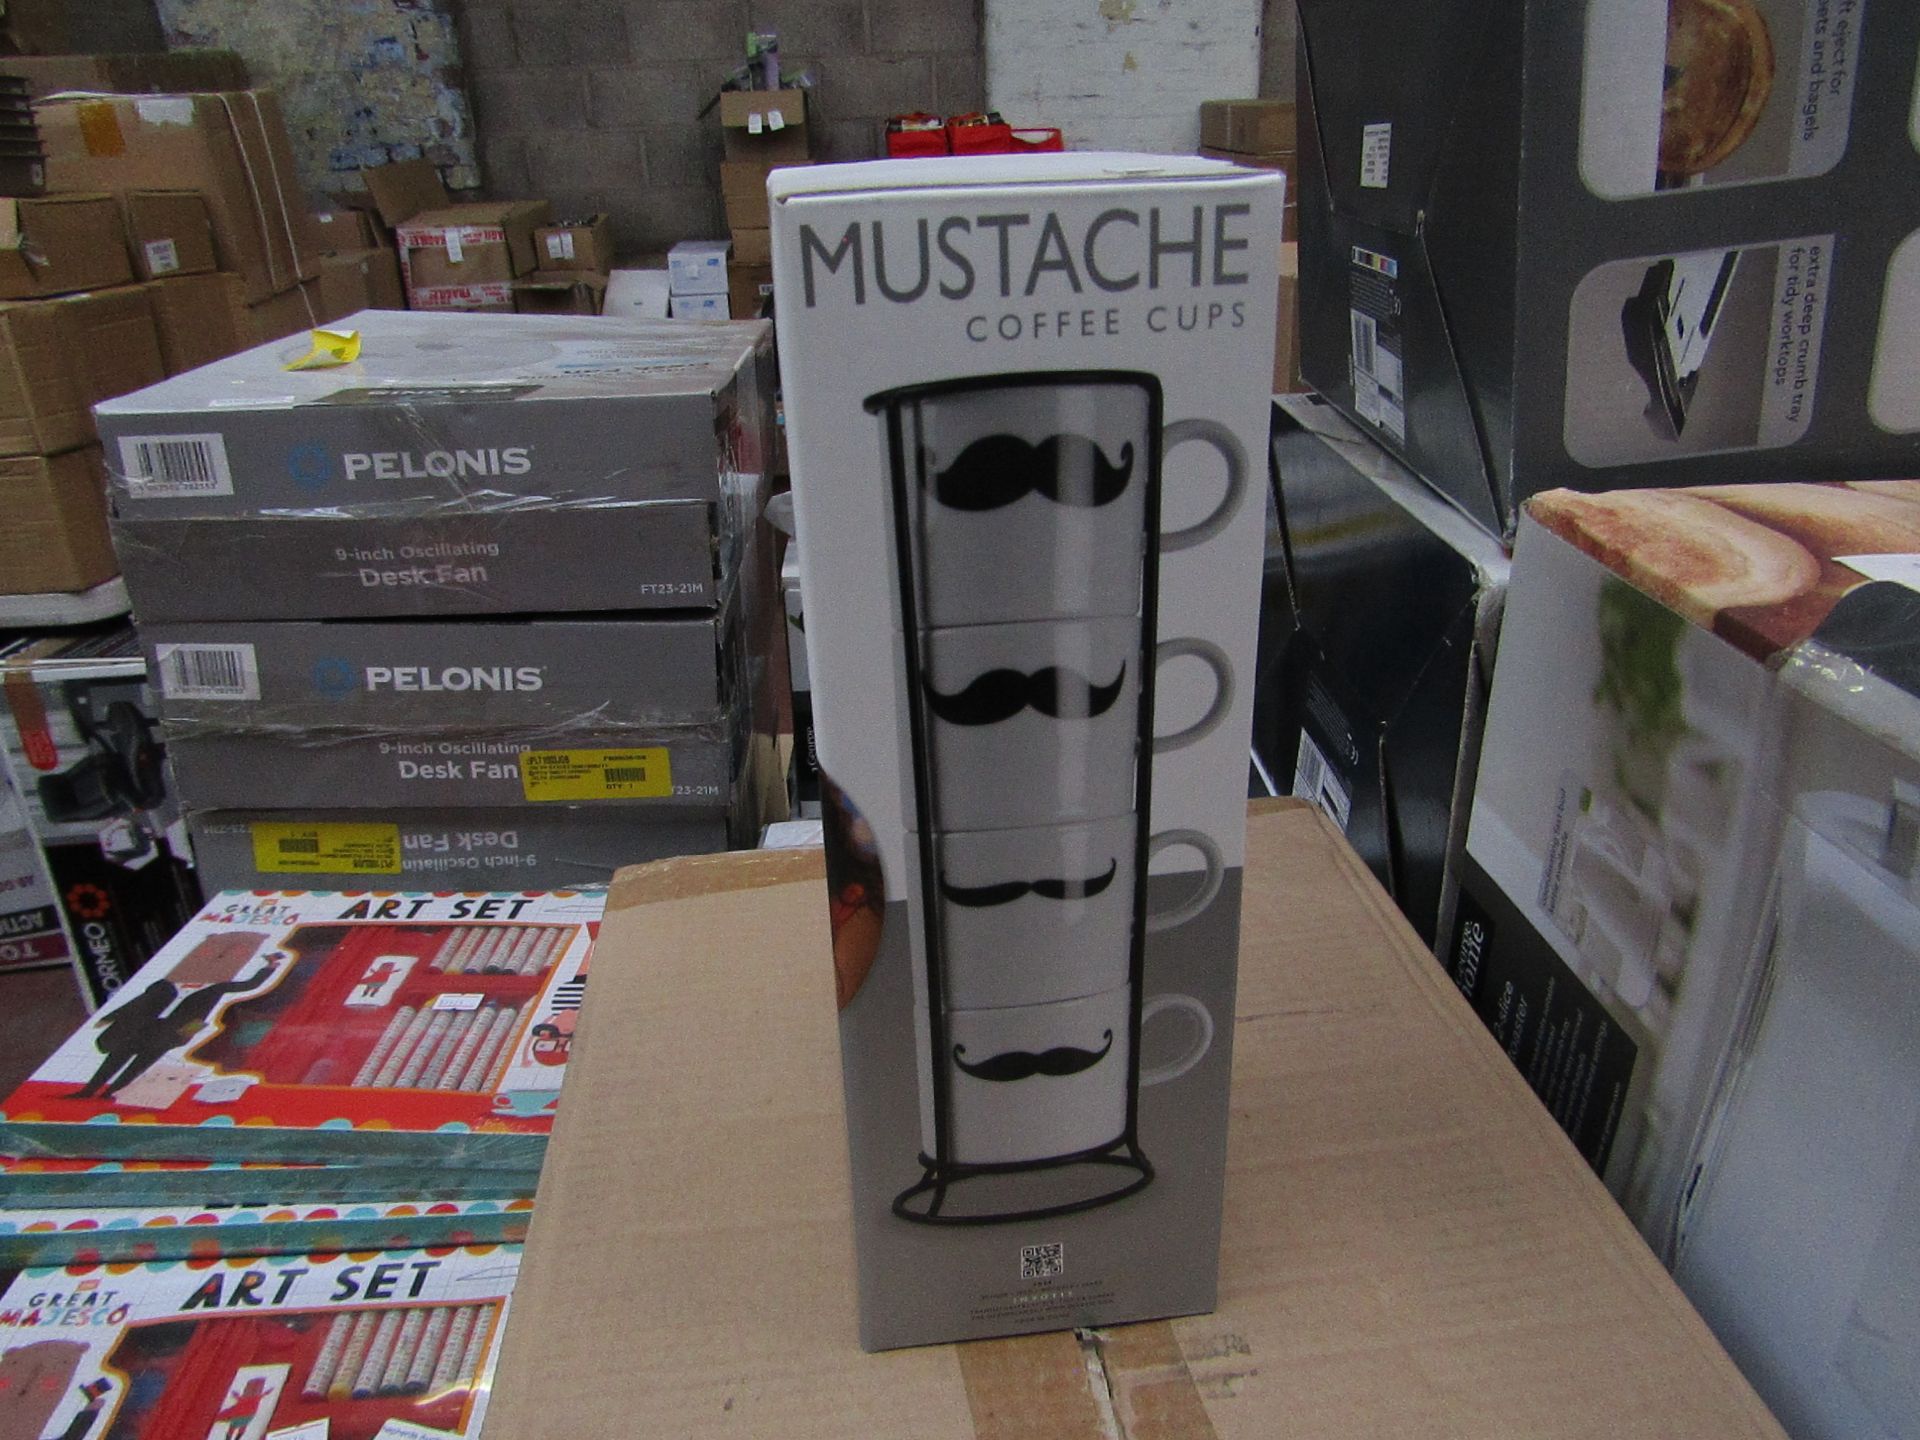 1x mustache coffee cups - new & boxed.